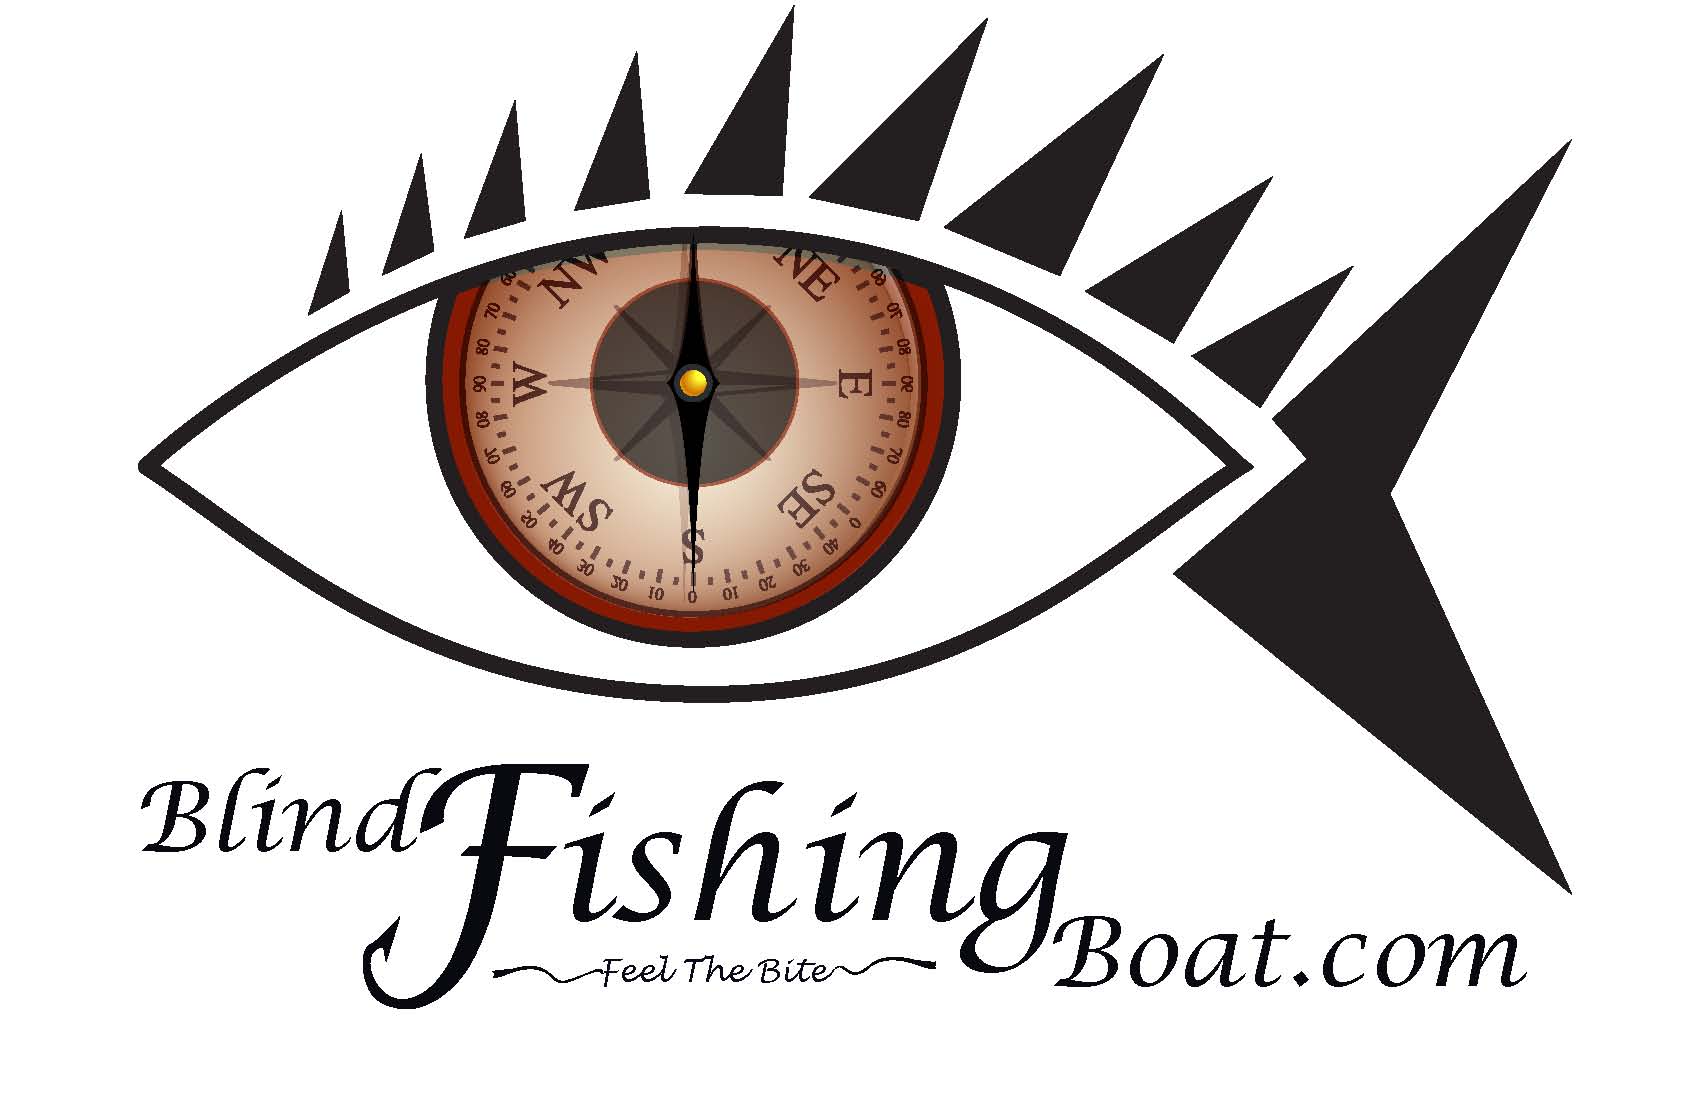 2009 Blind Fishing Boat Year-End Highlights | Blind Fishing Boat